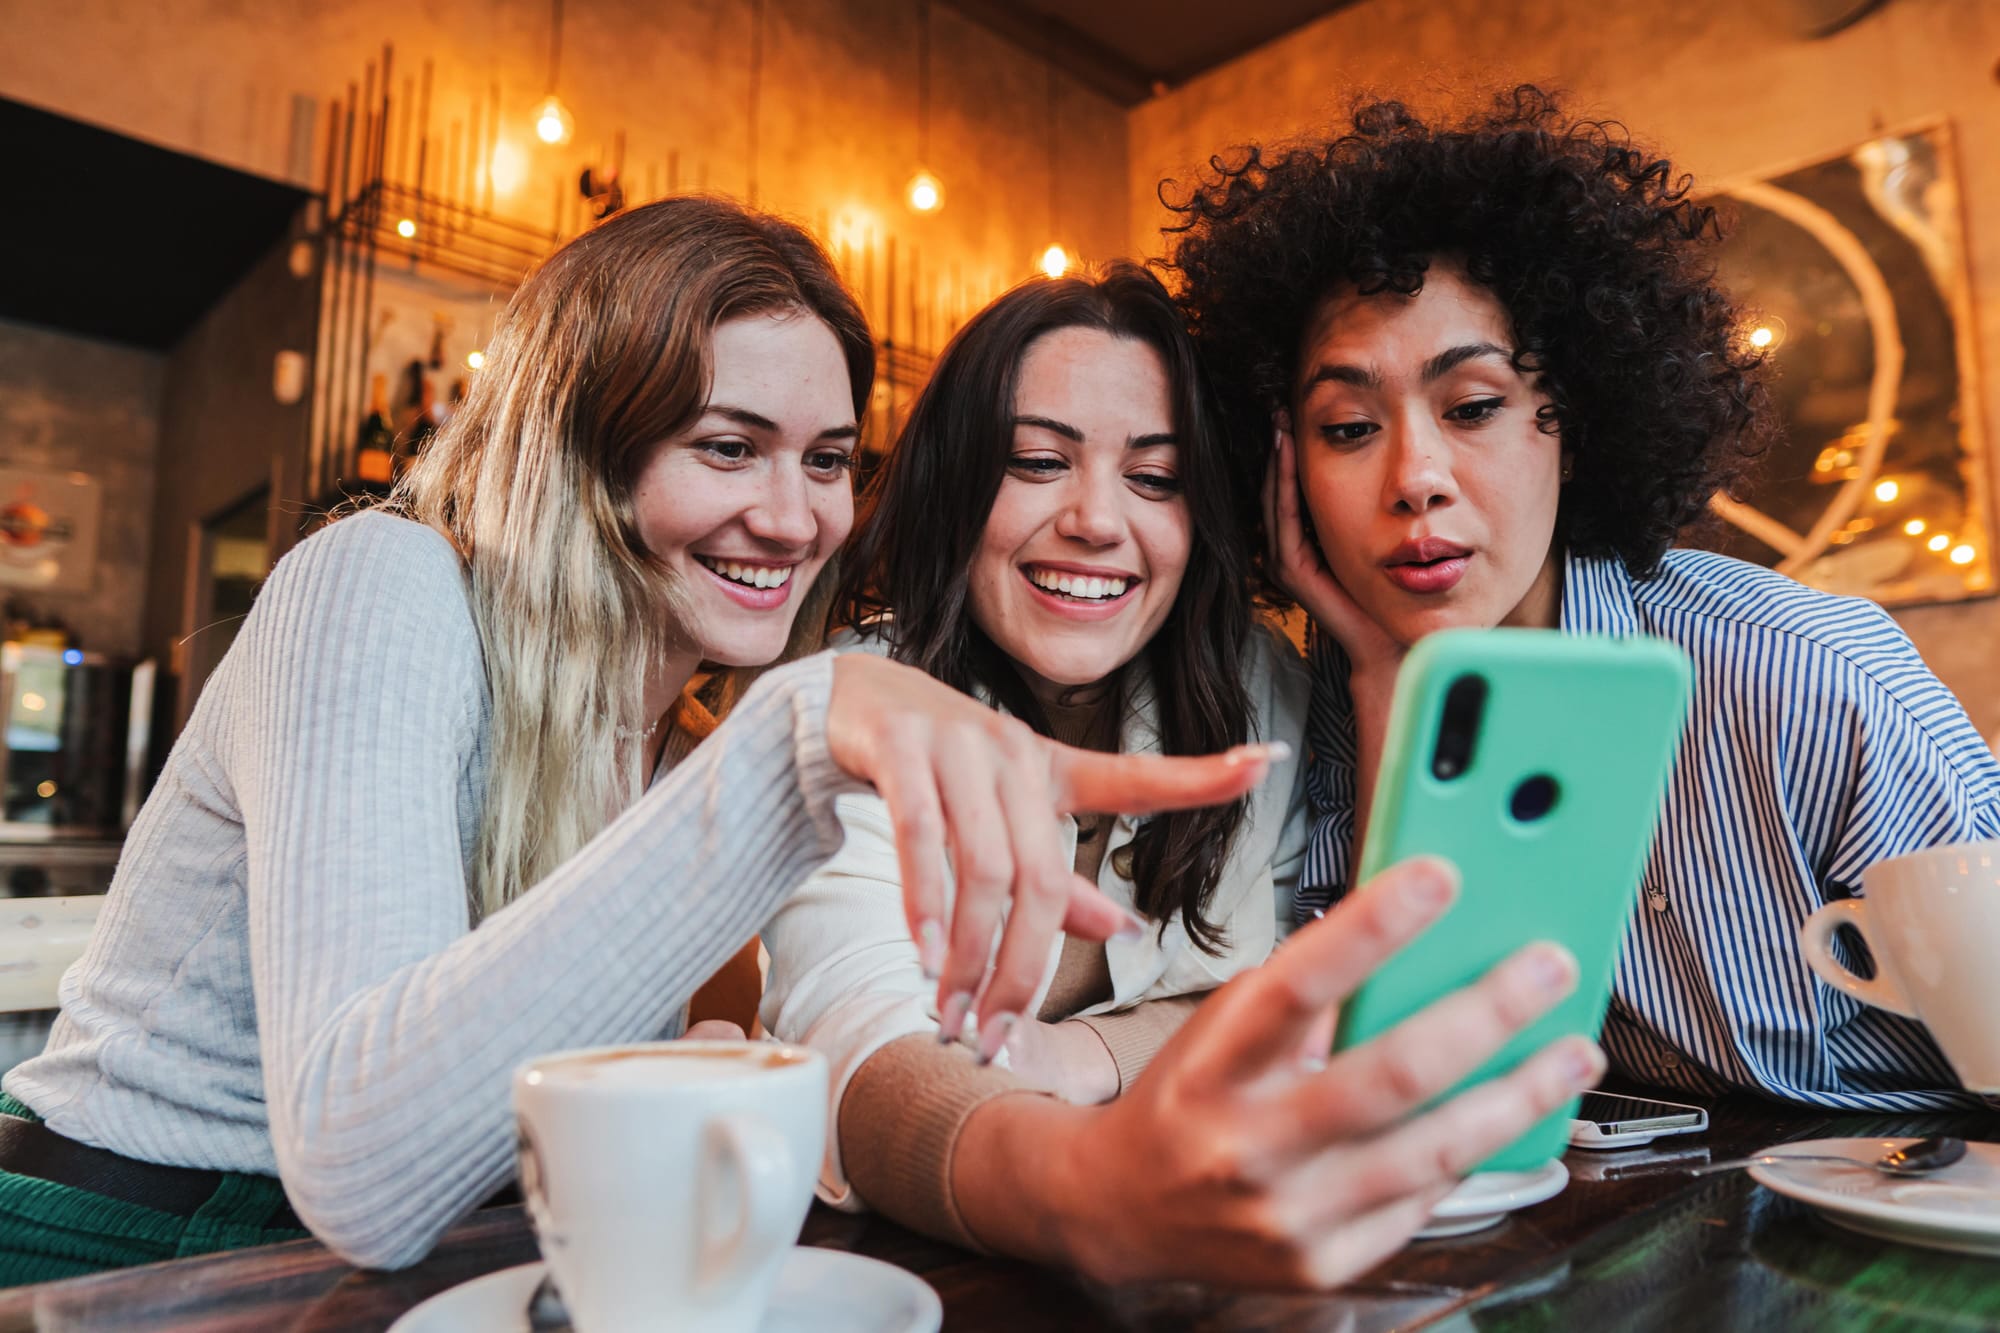 Three young women are smiling and looking at a phone in a restaurant.